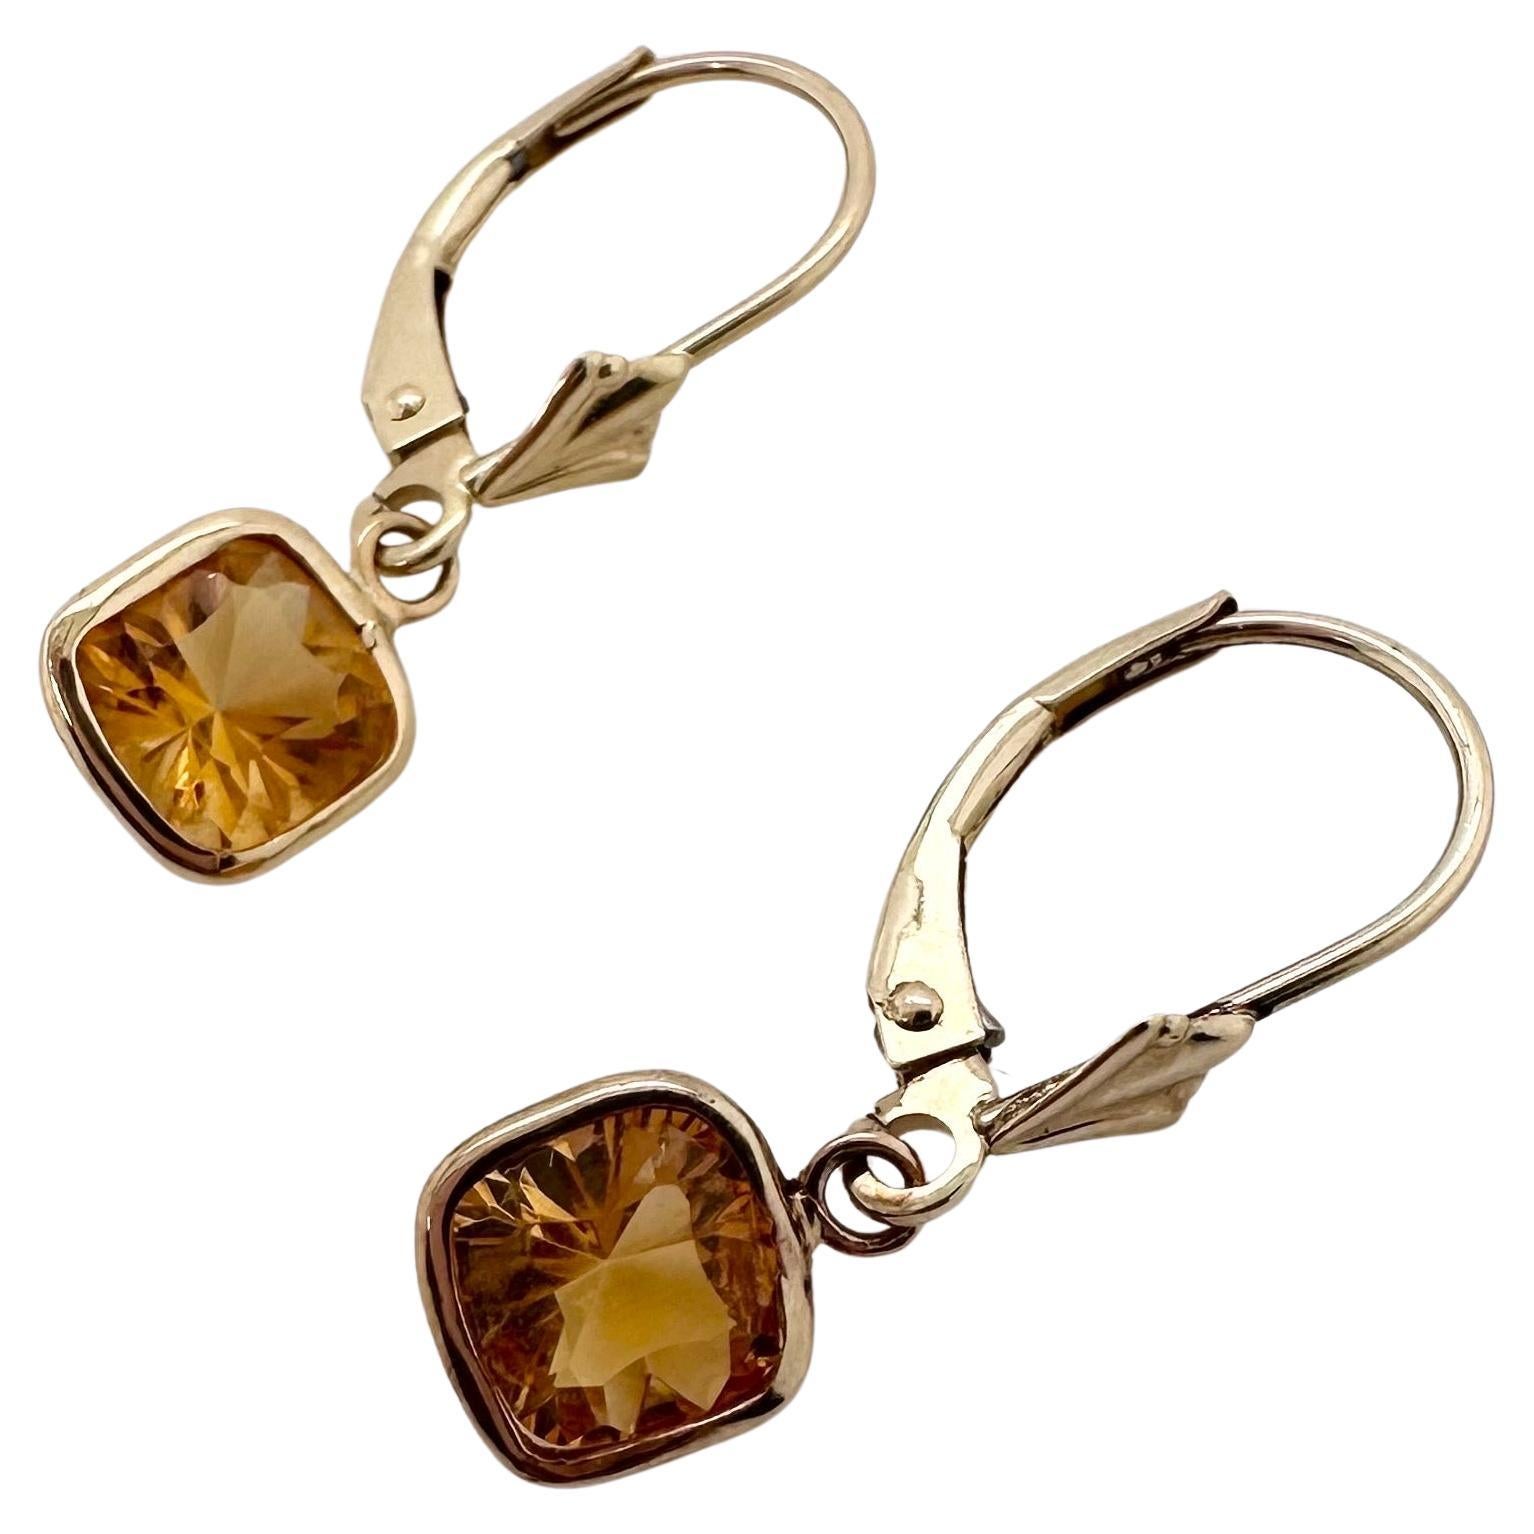 Rare cushion citrines cut with optix cut, its a cut that makes more facets and thus sparkles more, earringds are made in 14Kt gold.

Certificate of authenticity comes with purchase

ABOUT US
We are a family-owned business. Our studio in located in